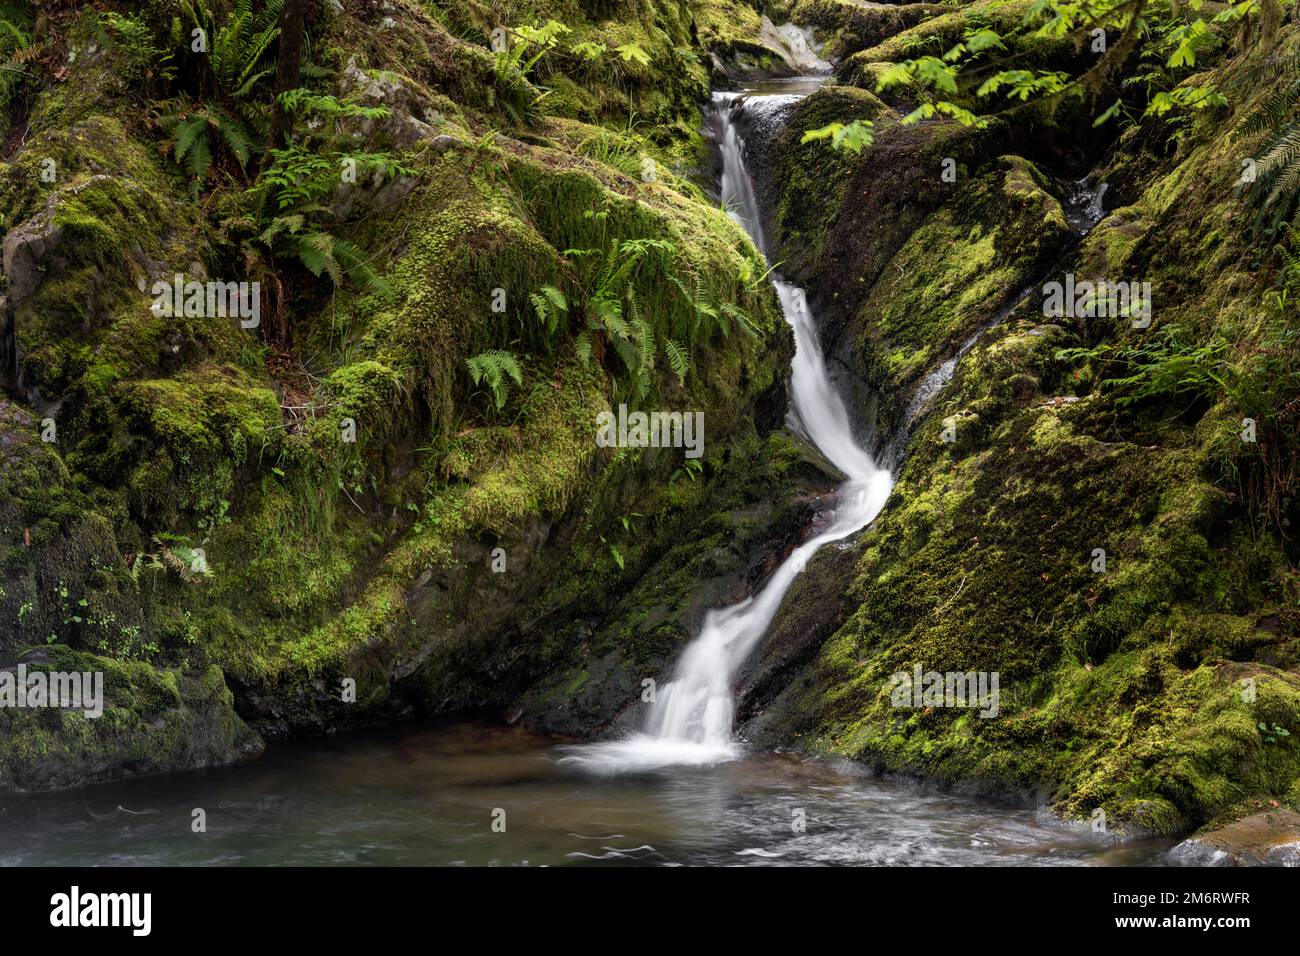 WA20846-00..... WASHINGTON - Small waterfall at Falls Creek in the Quinault Valley, Olympic National Forest. Stock Photo